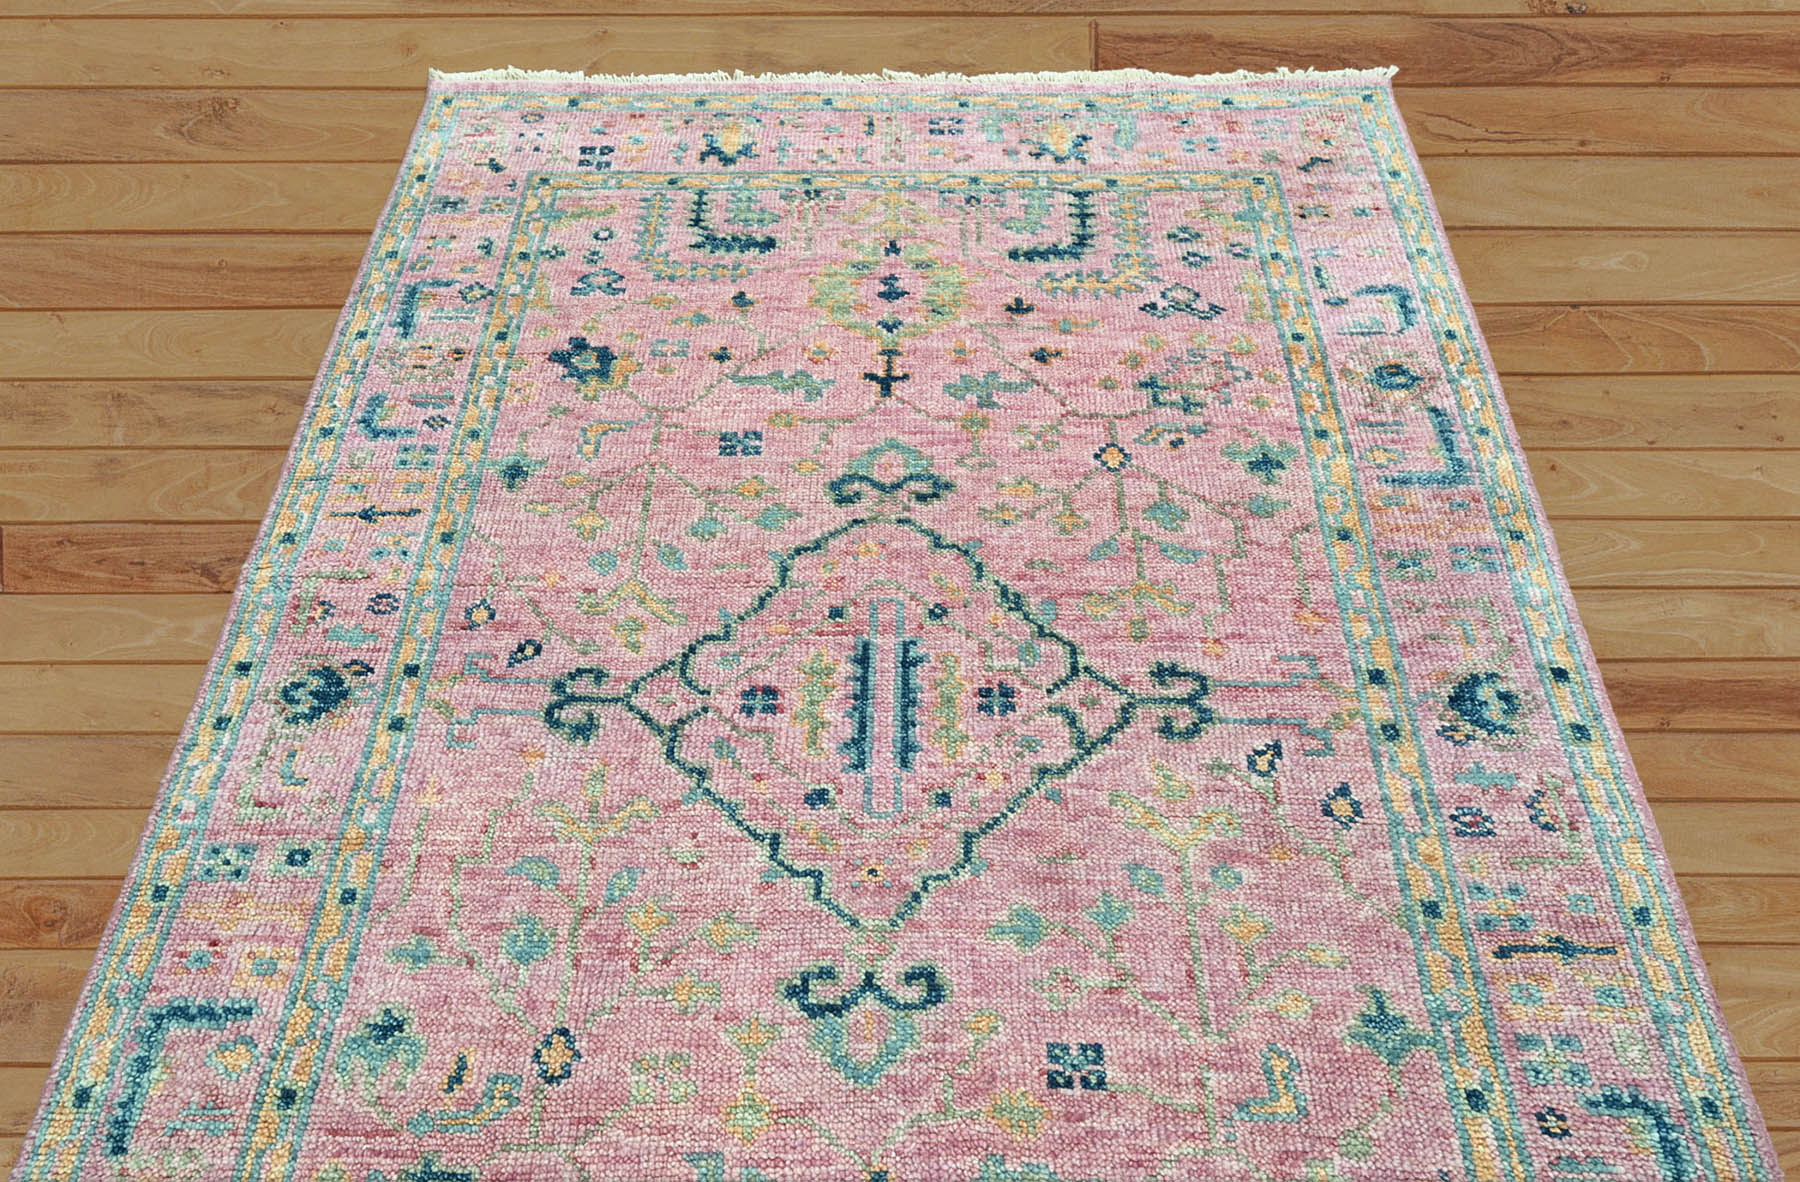 Tabiona 5x7 Pink LoomBloom Hand Knotted Transitional Patterned Oushak 100% Wool Oriental Area Rug